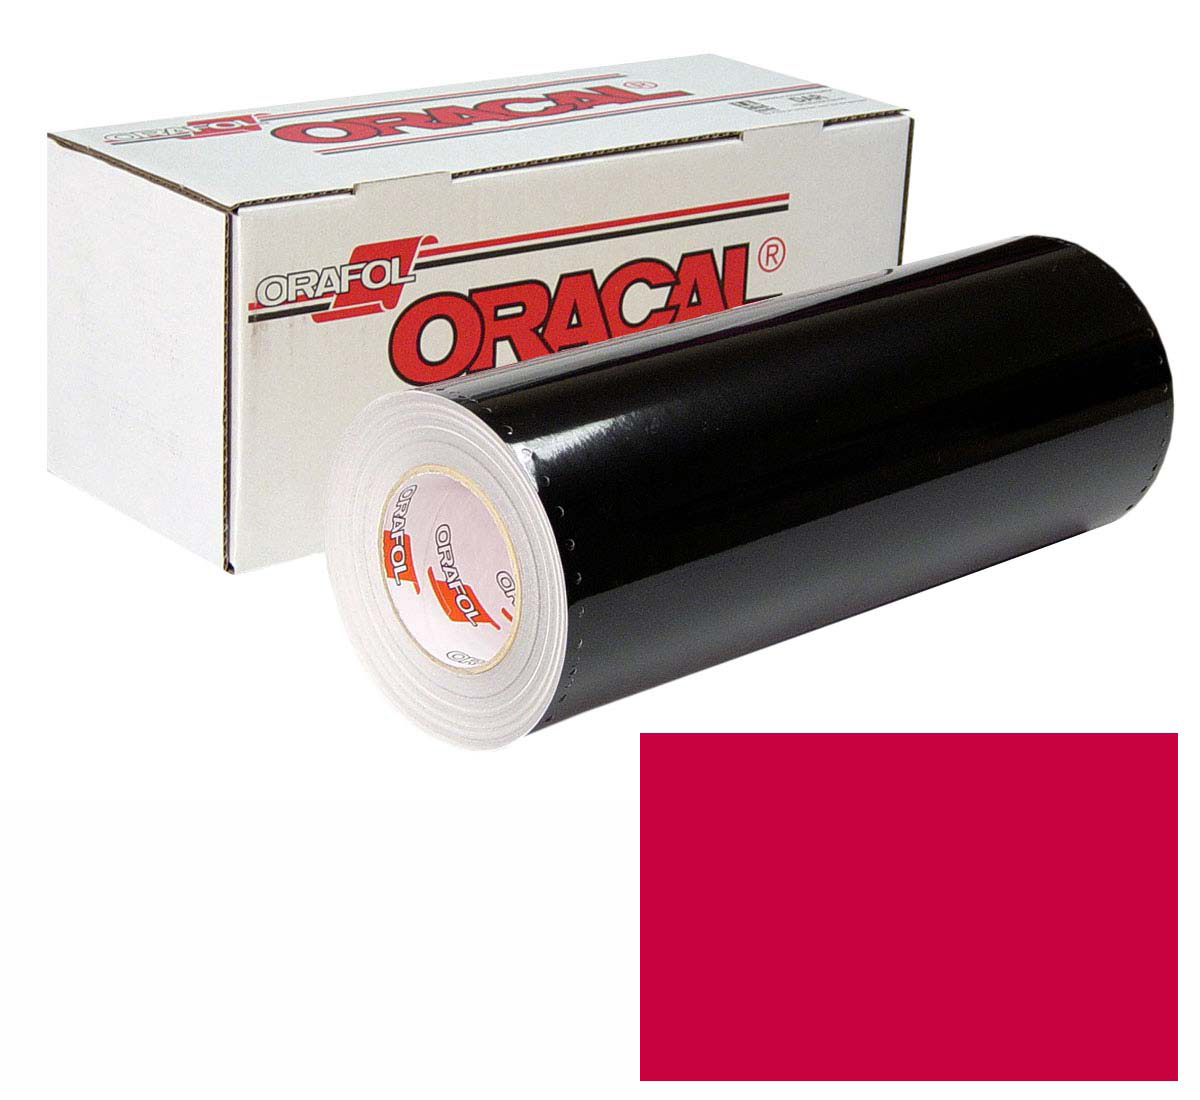 ORACAL 641 30in X 50yd 031 Red